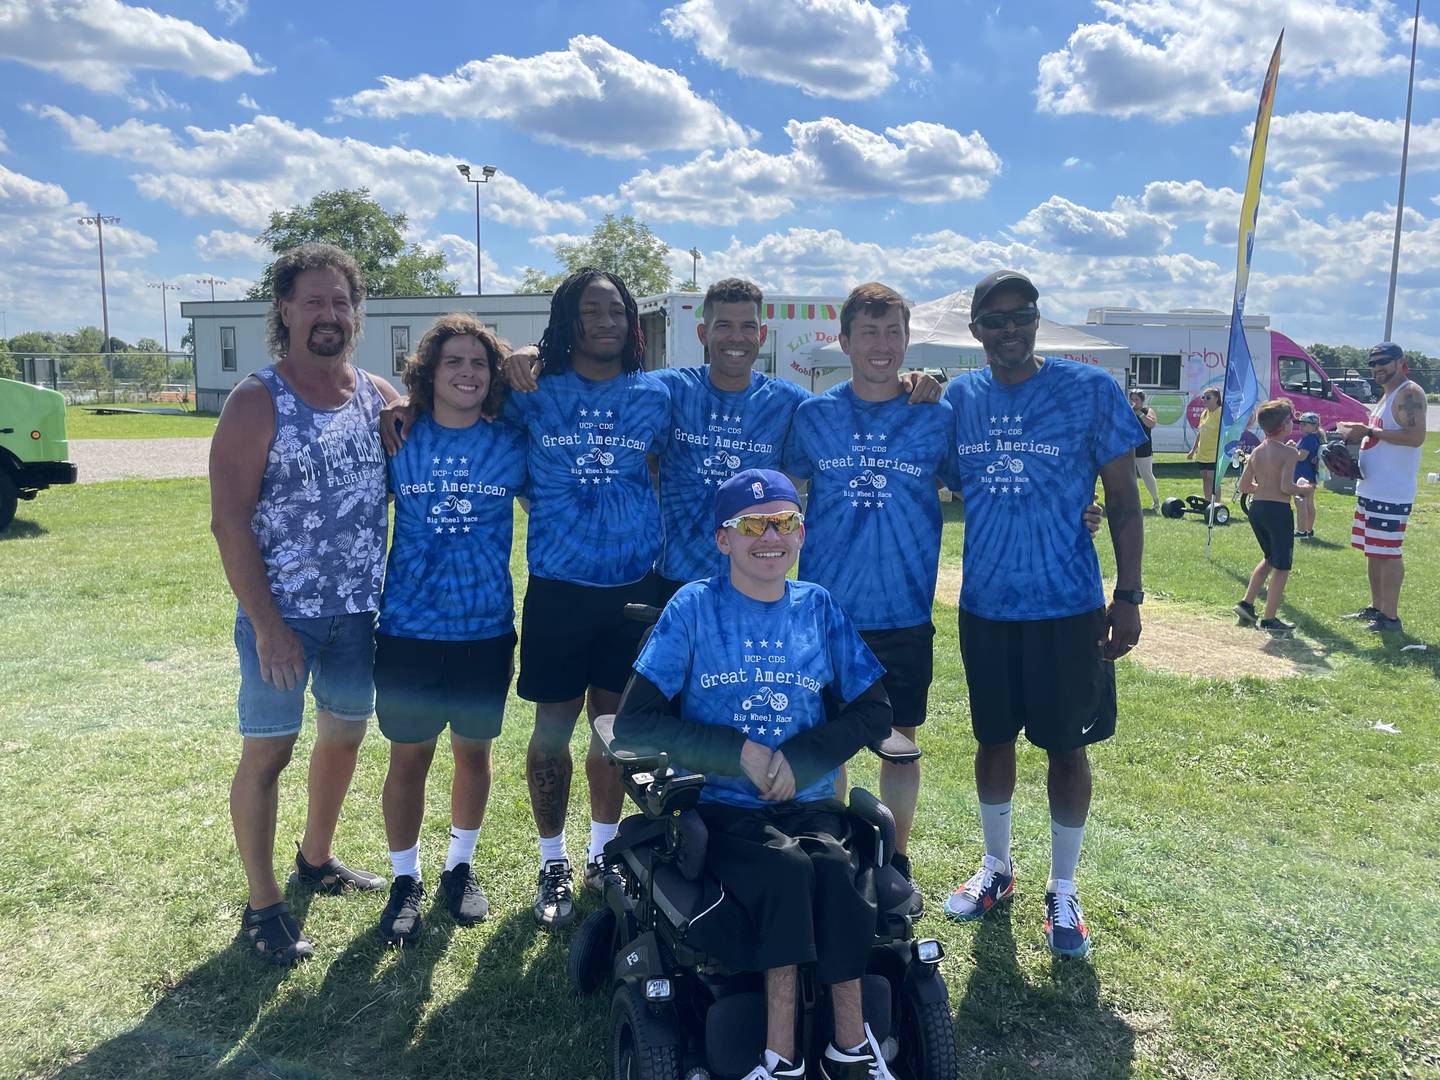 Team Lawson Sizemore took first place at the 2nd annual Great American Big Wheel Race on Sunday, July 31, 2022, at Busey Bank Joliet Memorial Stadium. The event was a fundraiser for United Cerebral Palsy-Center for Disability Services in Joliet. Lawson Sizemore of Shorewood is seated.